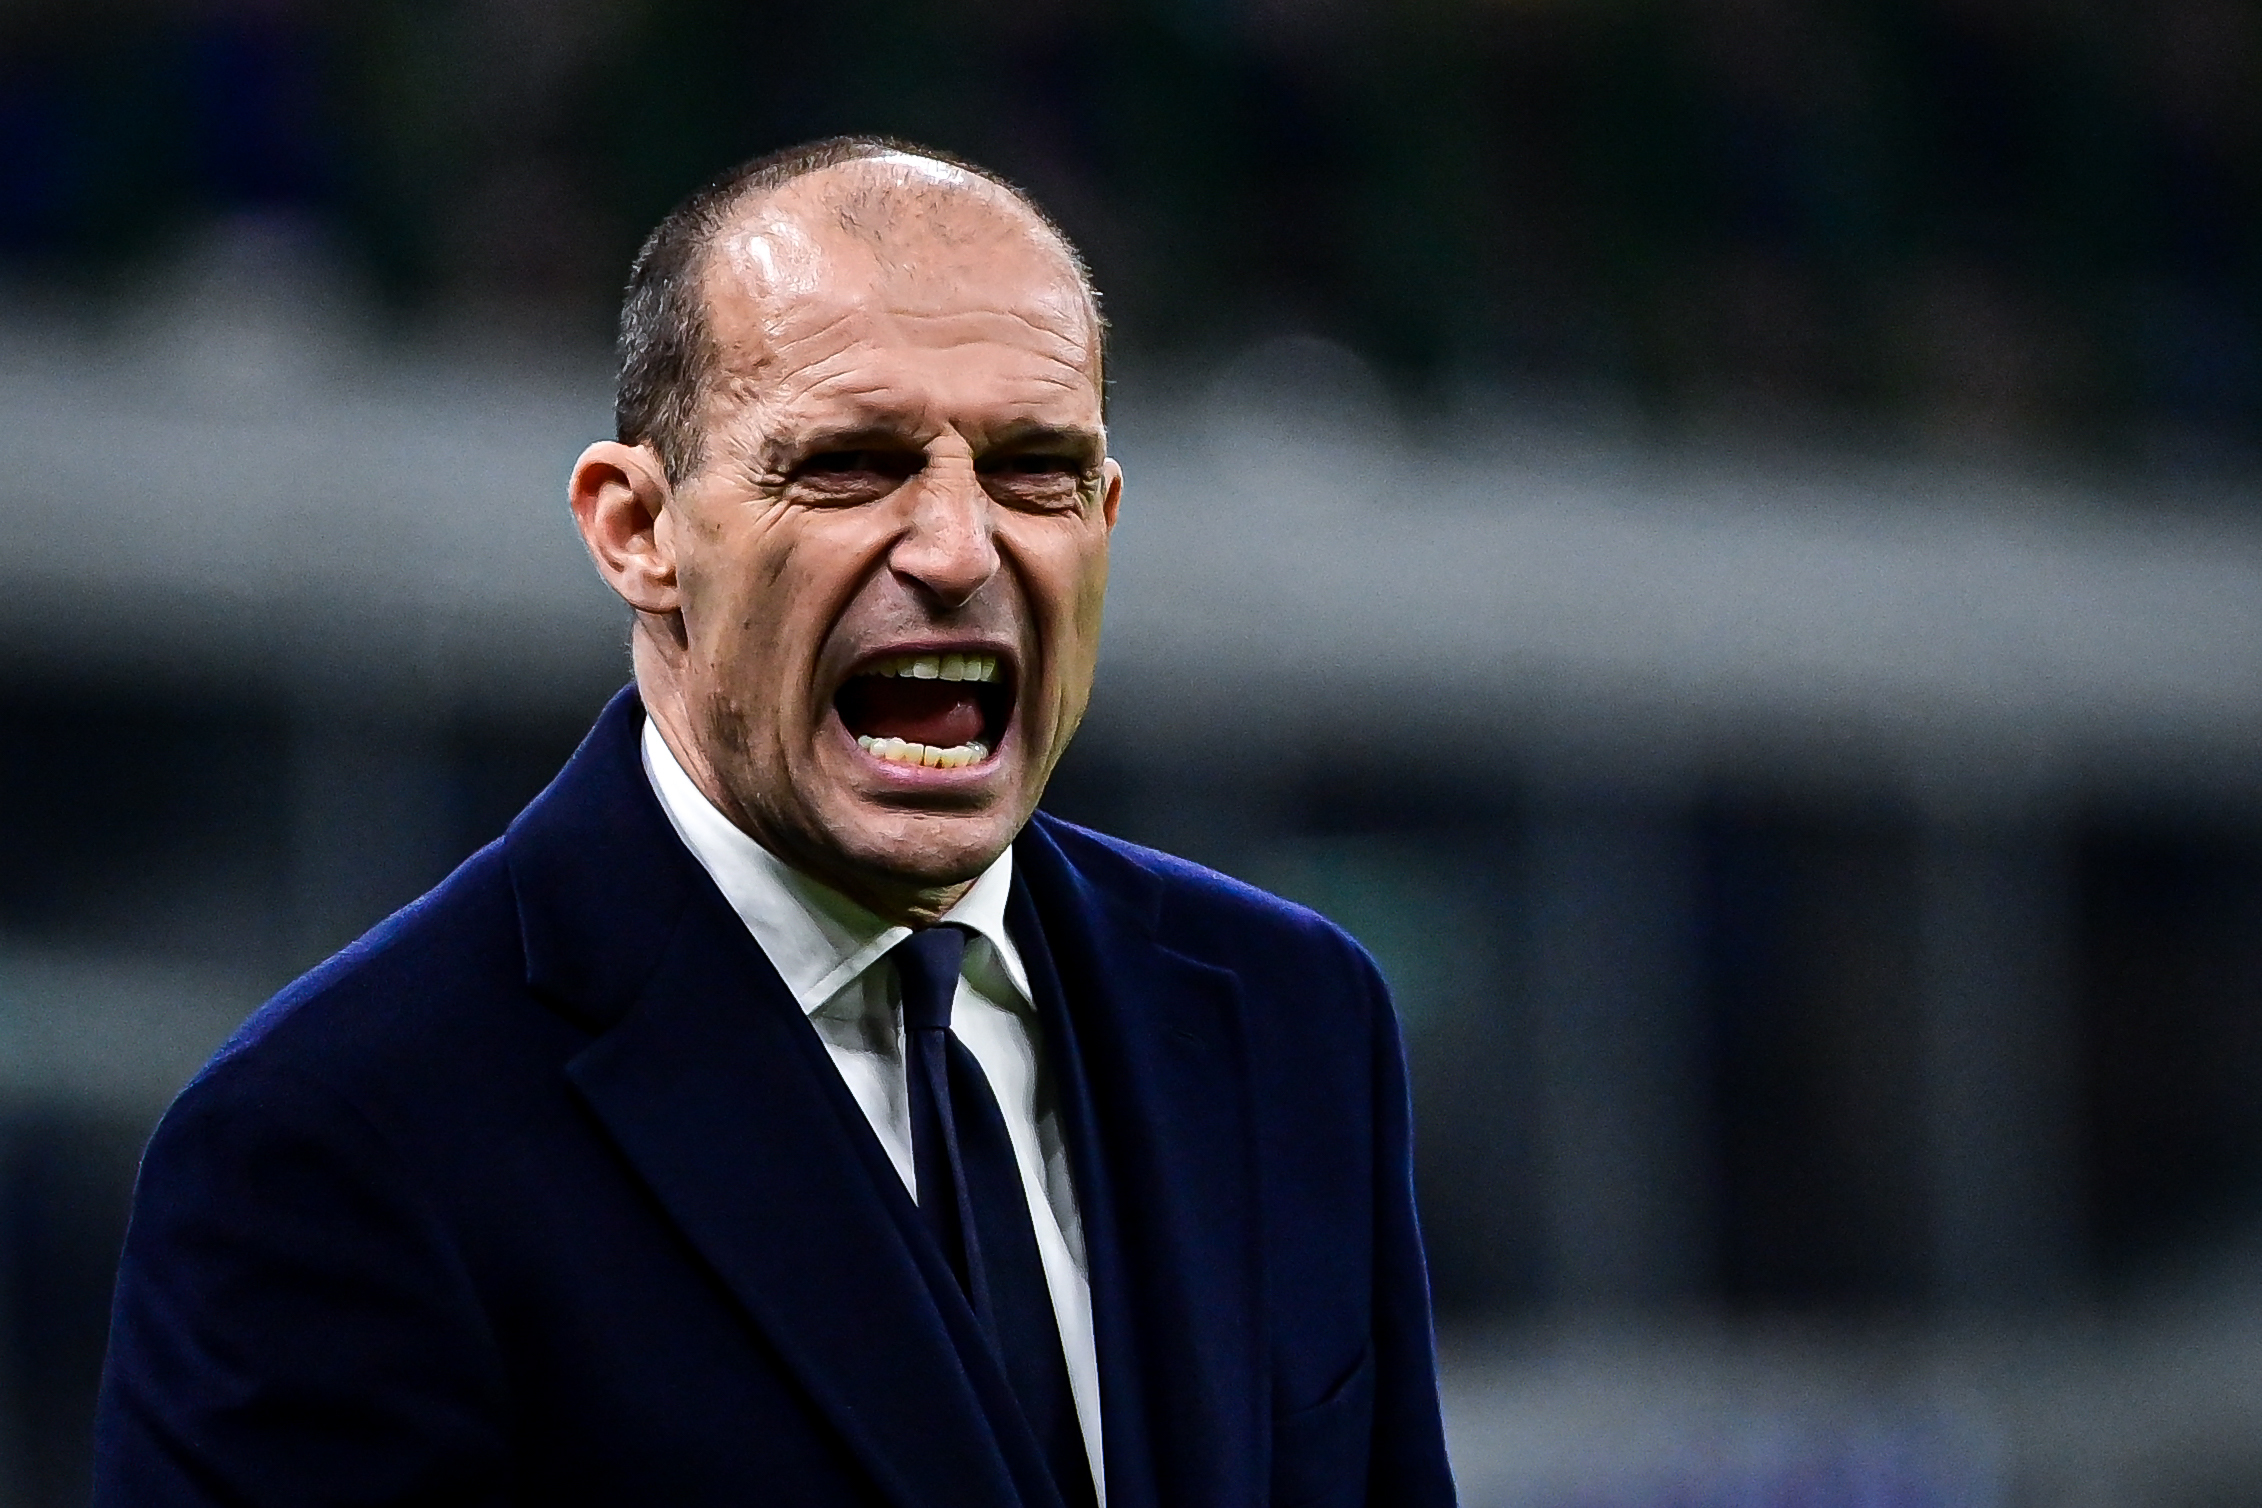 Giovanni Galeone, the mentor and a close friend of Massimiliano Allegri, said his piece about the coach's future at Juventus.